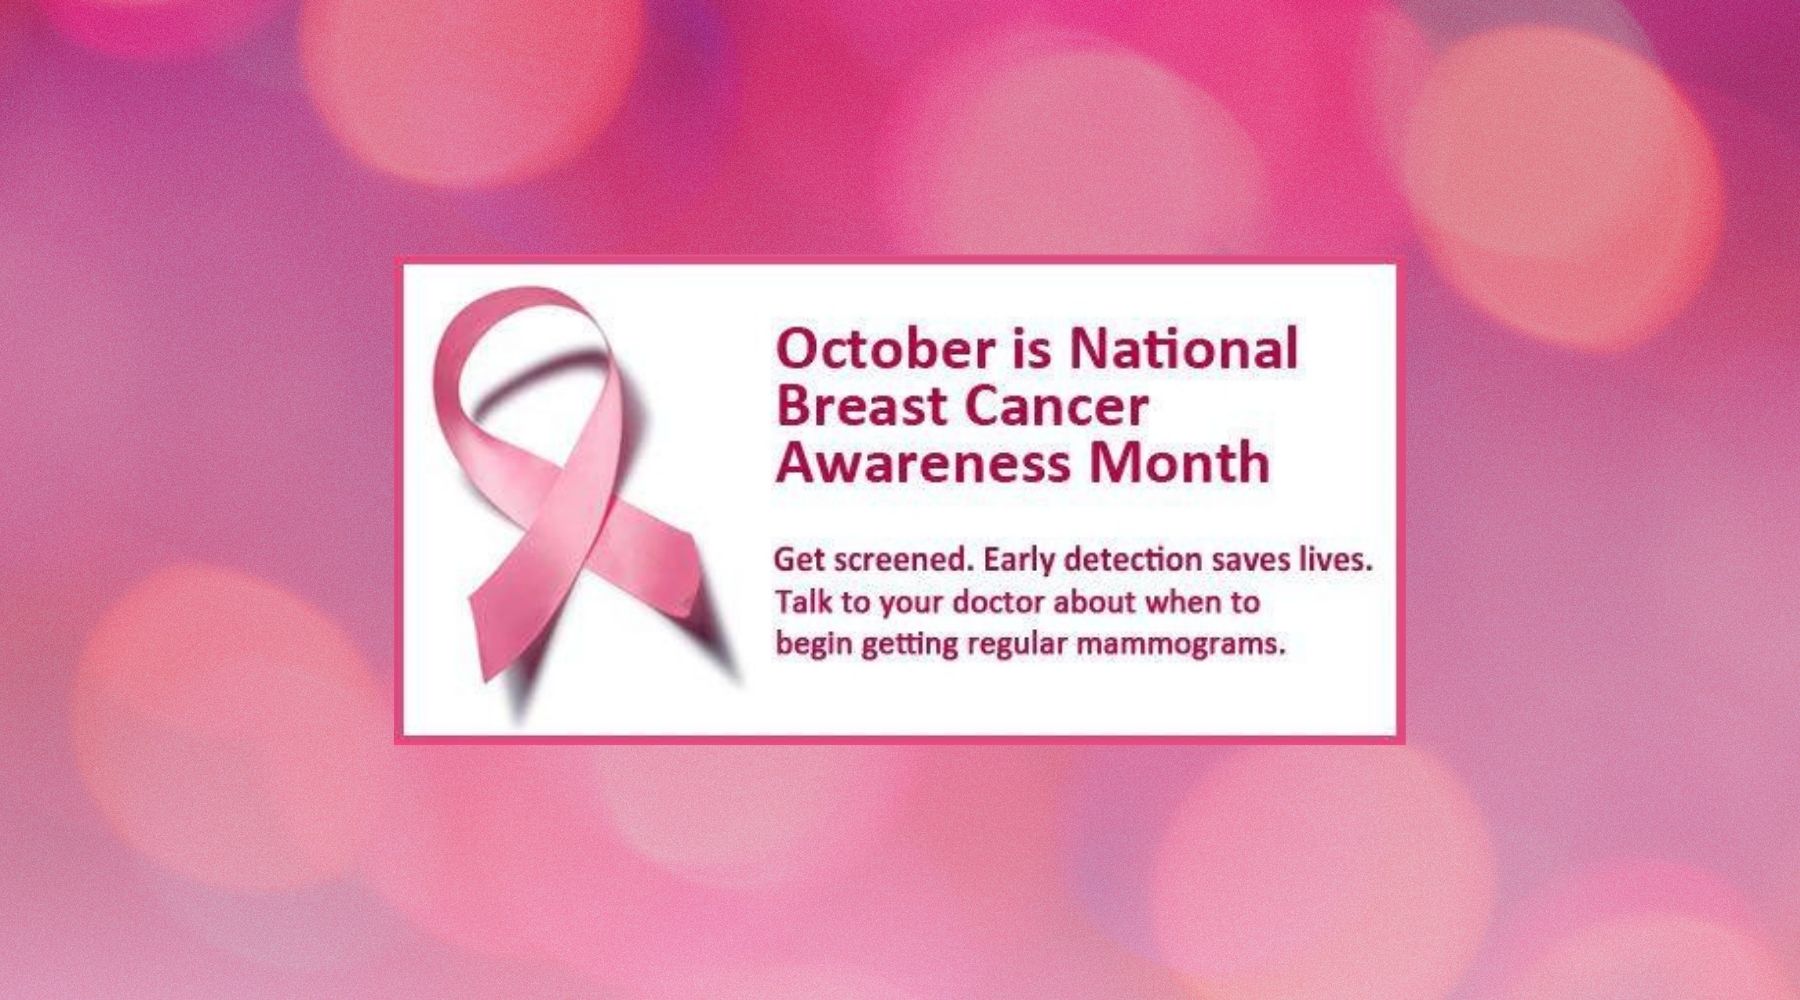 October is Breast Cancer Awareness Month! Have you checked the girls lately?